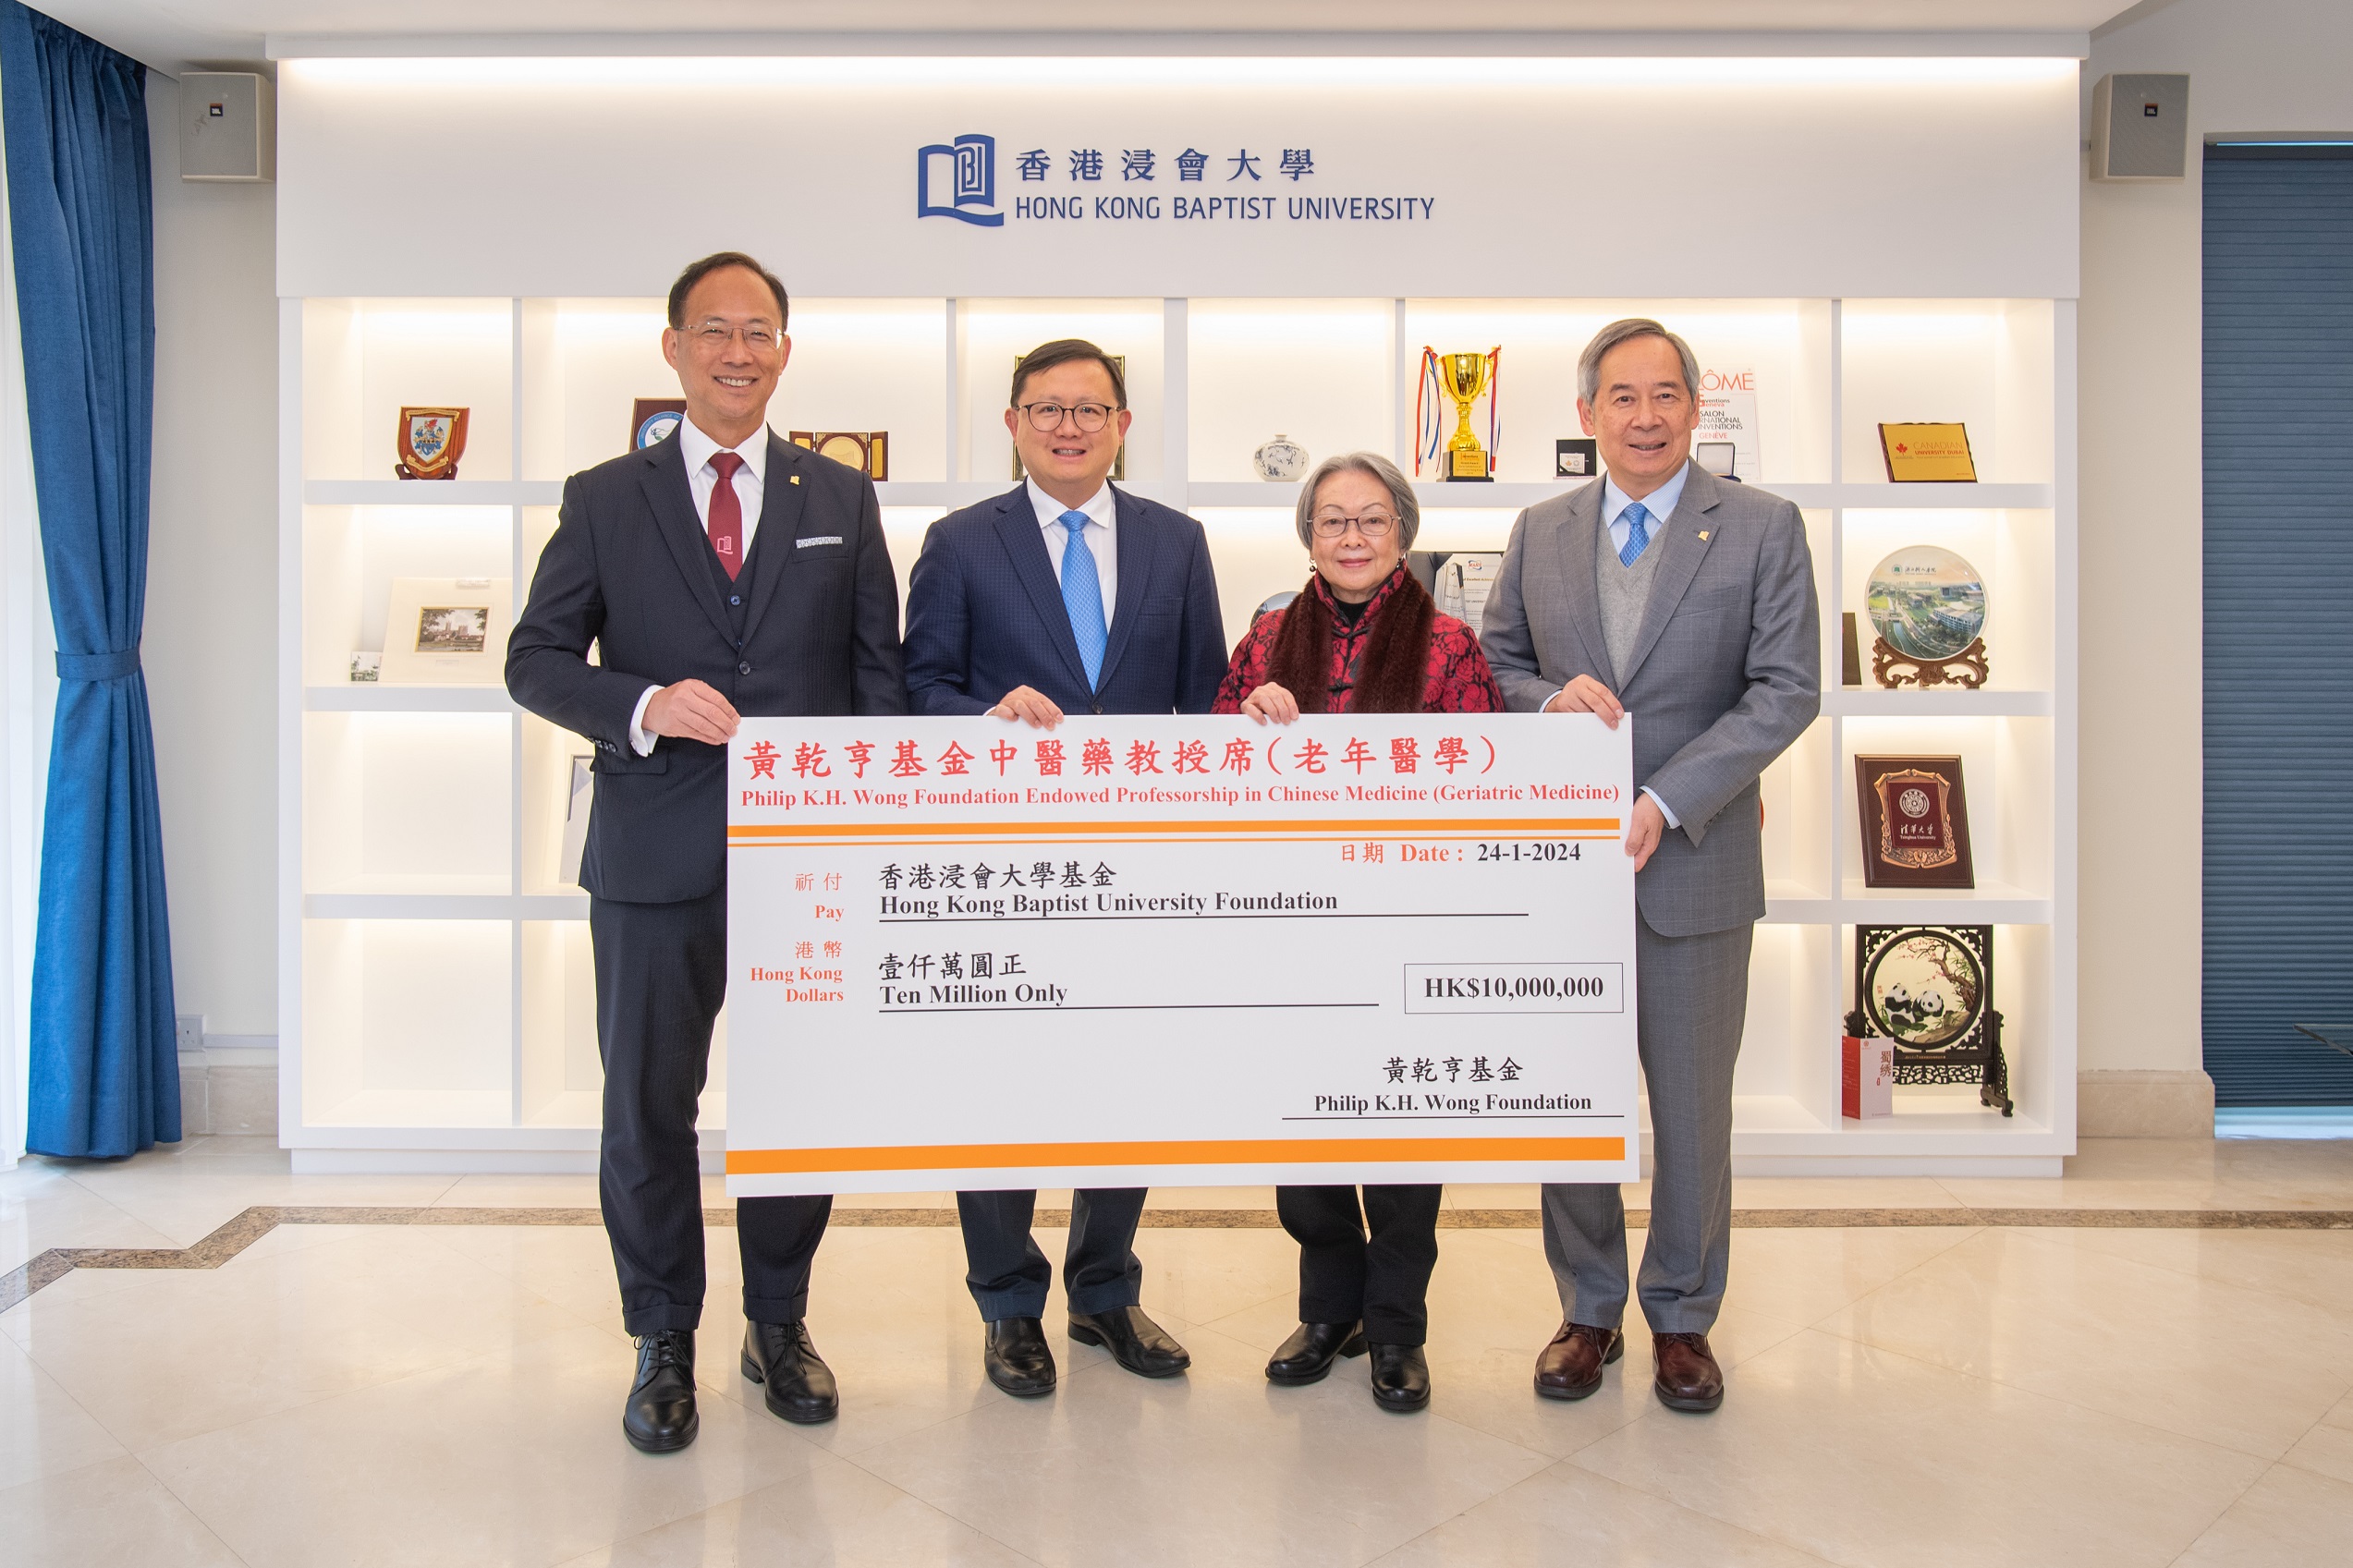 Mrs Gertrude Wong, Chairman of the Board of the Philip K.H. Wong Foundation (second right), along with Dr Kennedy Wong, Councillor of the Philip K.H. Wong Foundation (second left), present a cheque to Dr Clement Chen, Chairman of the Council and the Court (first right), and Professor Alexander Wai, President and Vice-Chancellor of HKBU (first left). 